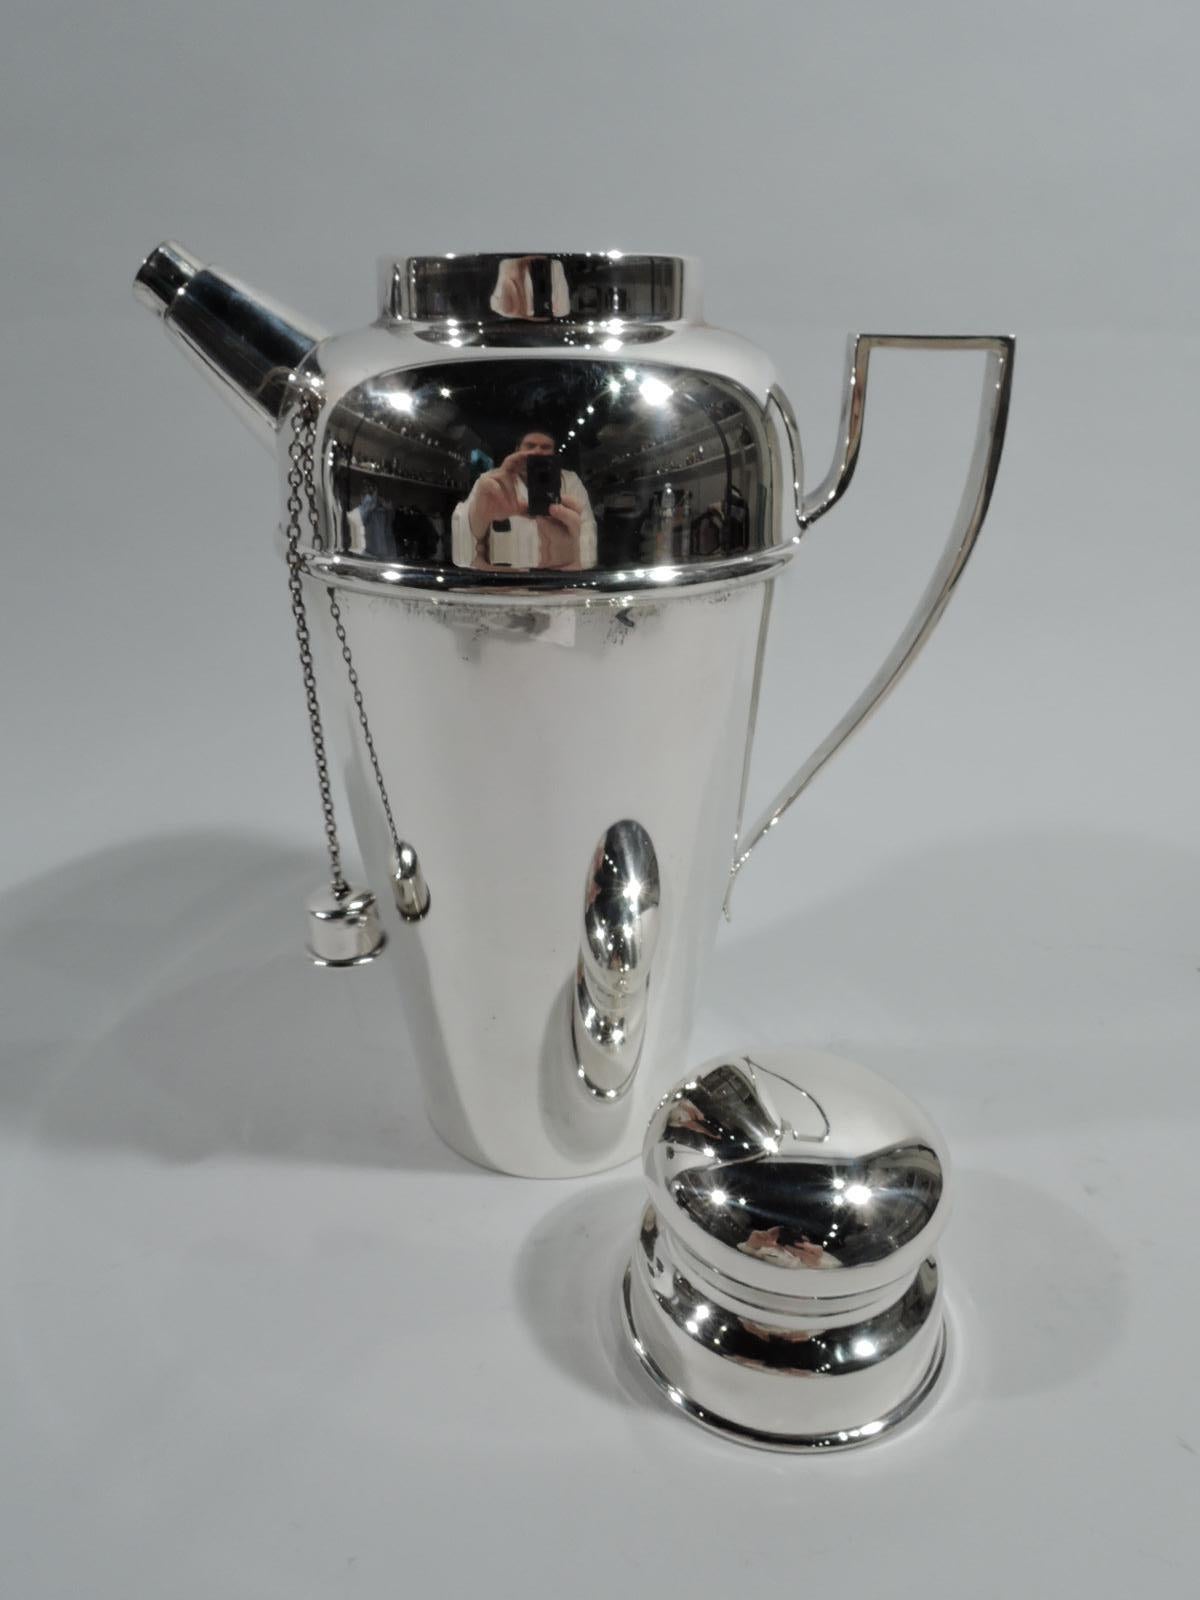 American Art Deco sterling silver cocktail shaker, ca 1925. Retailed by Tiffany & Co. in New York. Straight and tapering bowl, curved shoulder, short inset neck, and sleek scroll-bracket handle. Bun cover and stubby diagonal spout with chained cap.